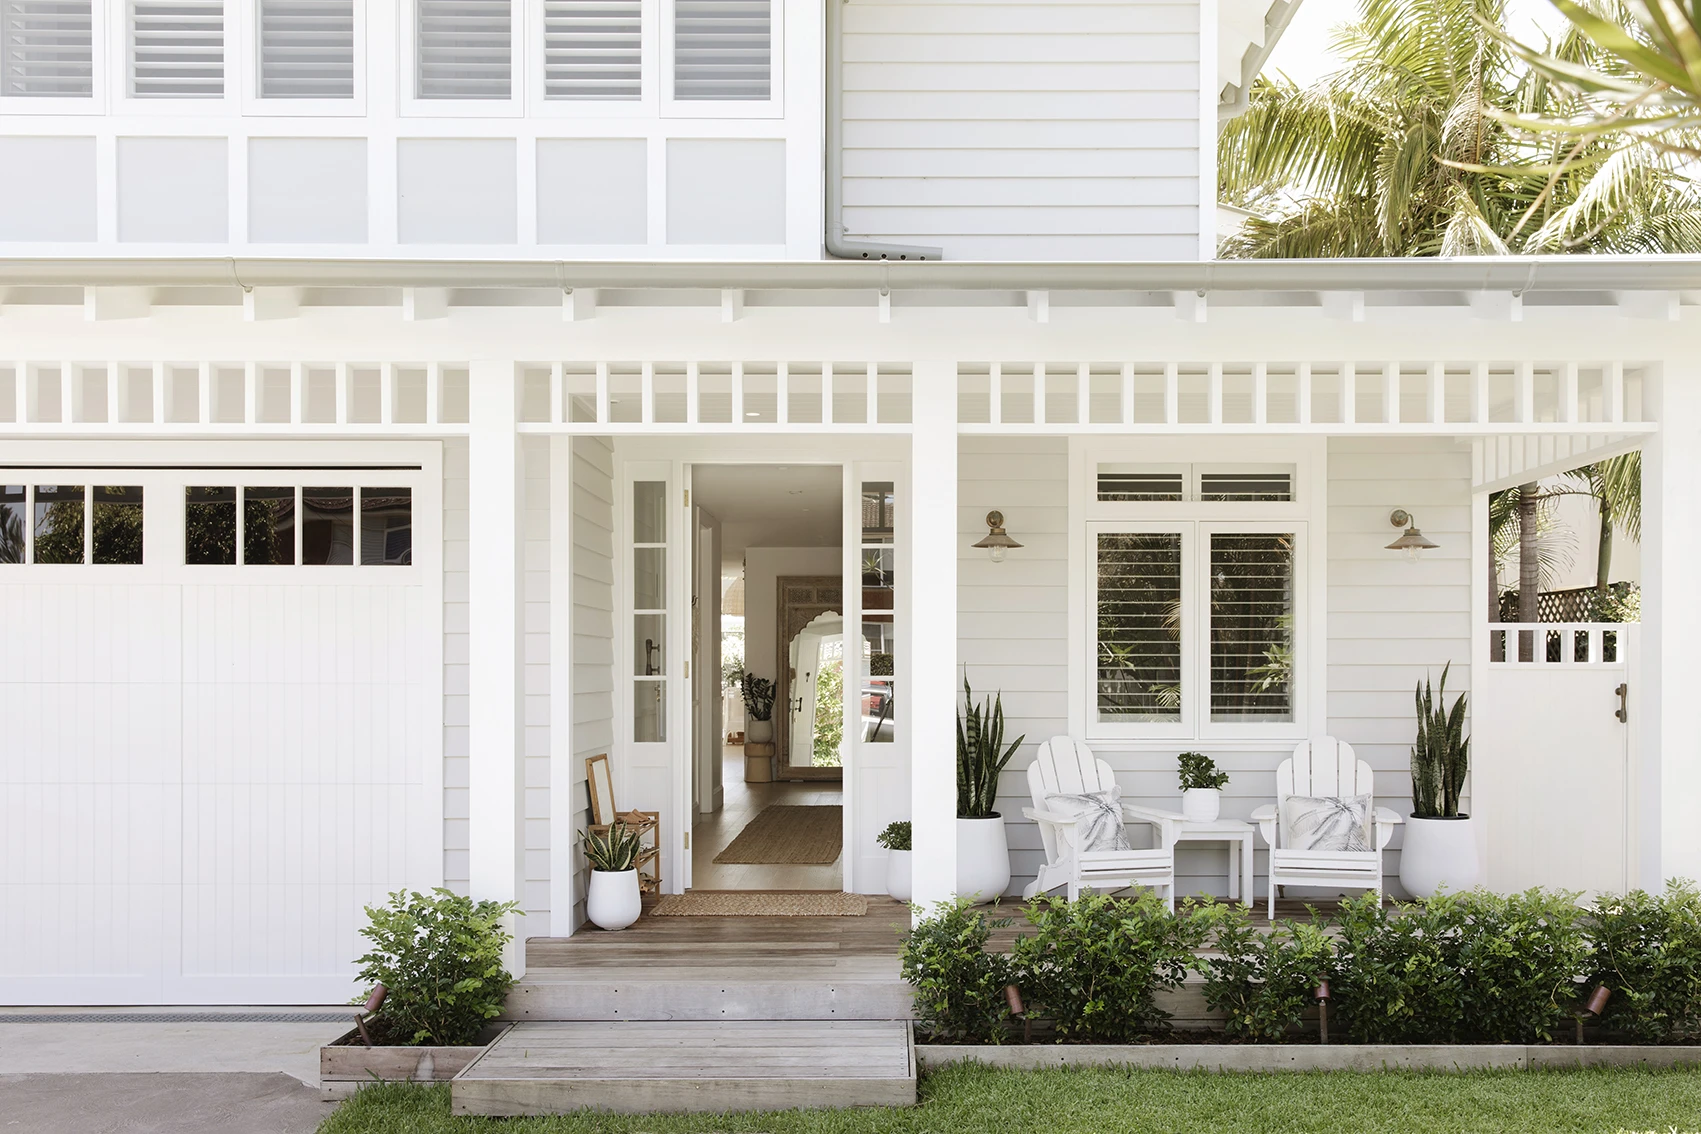 White and grey double-storey weatherboard house.